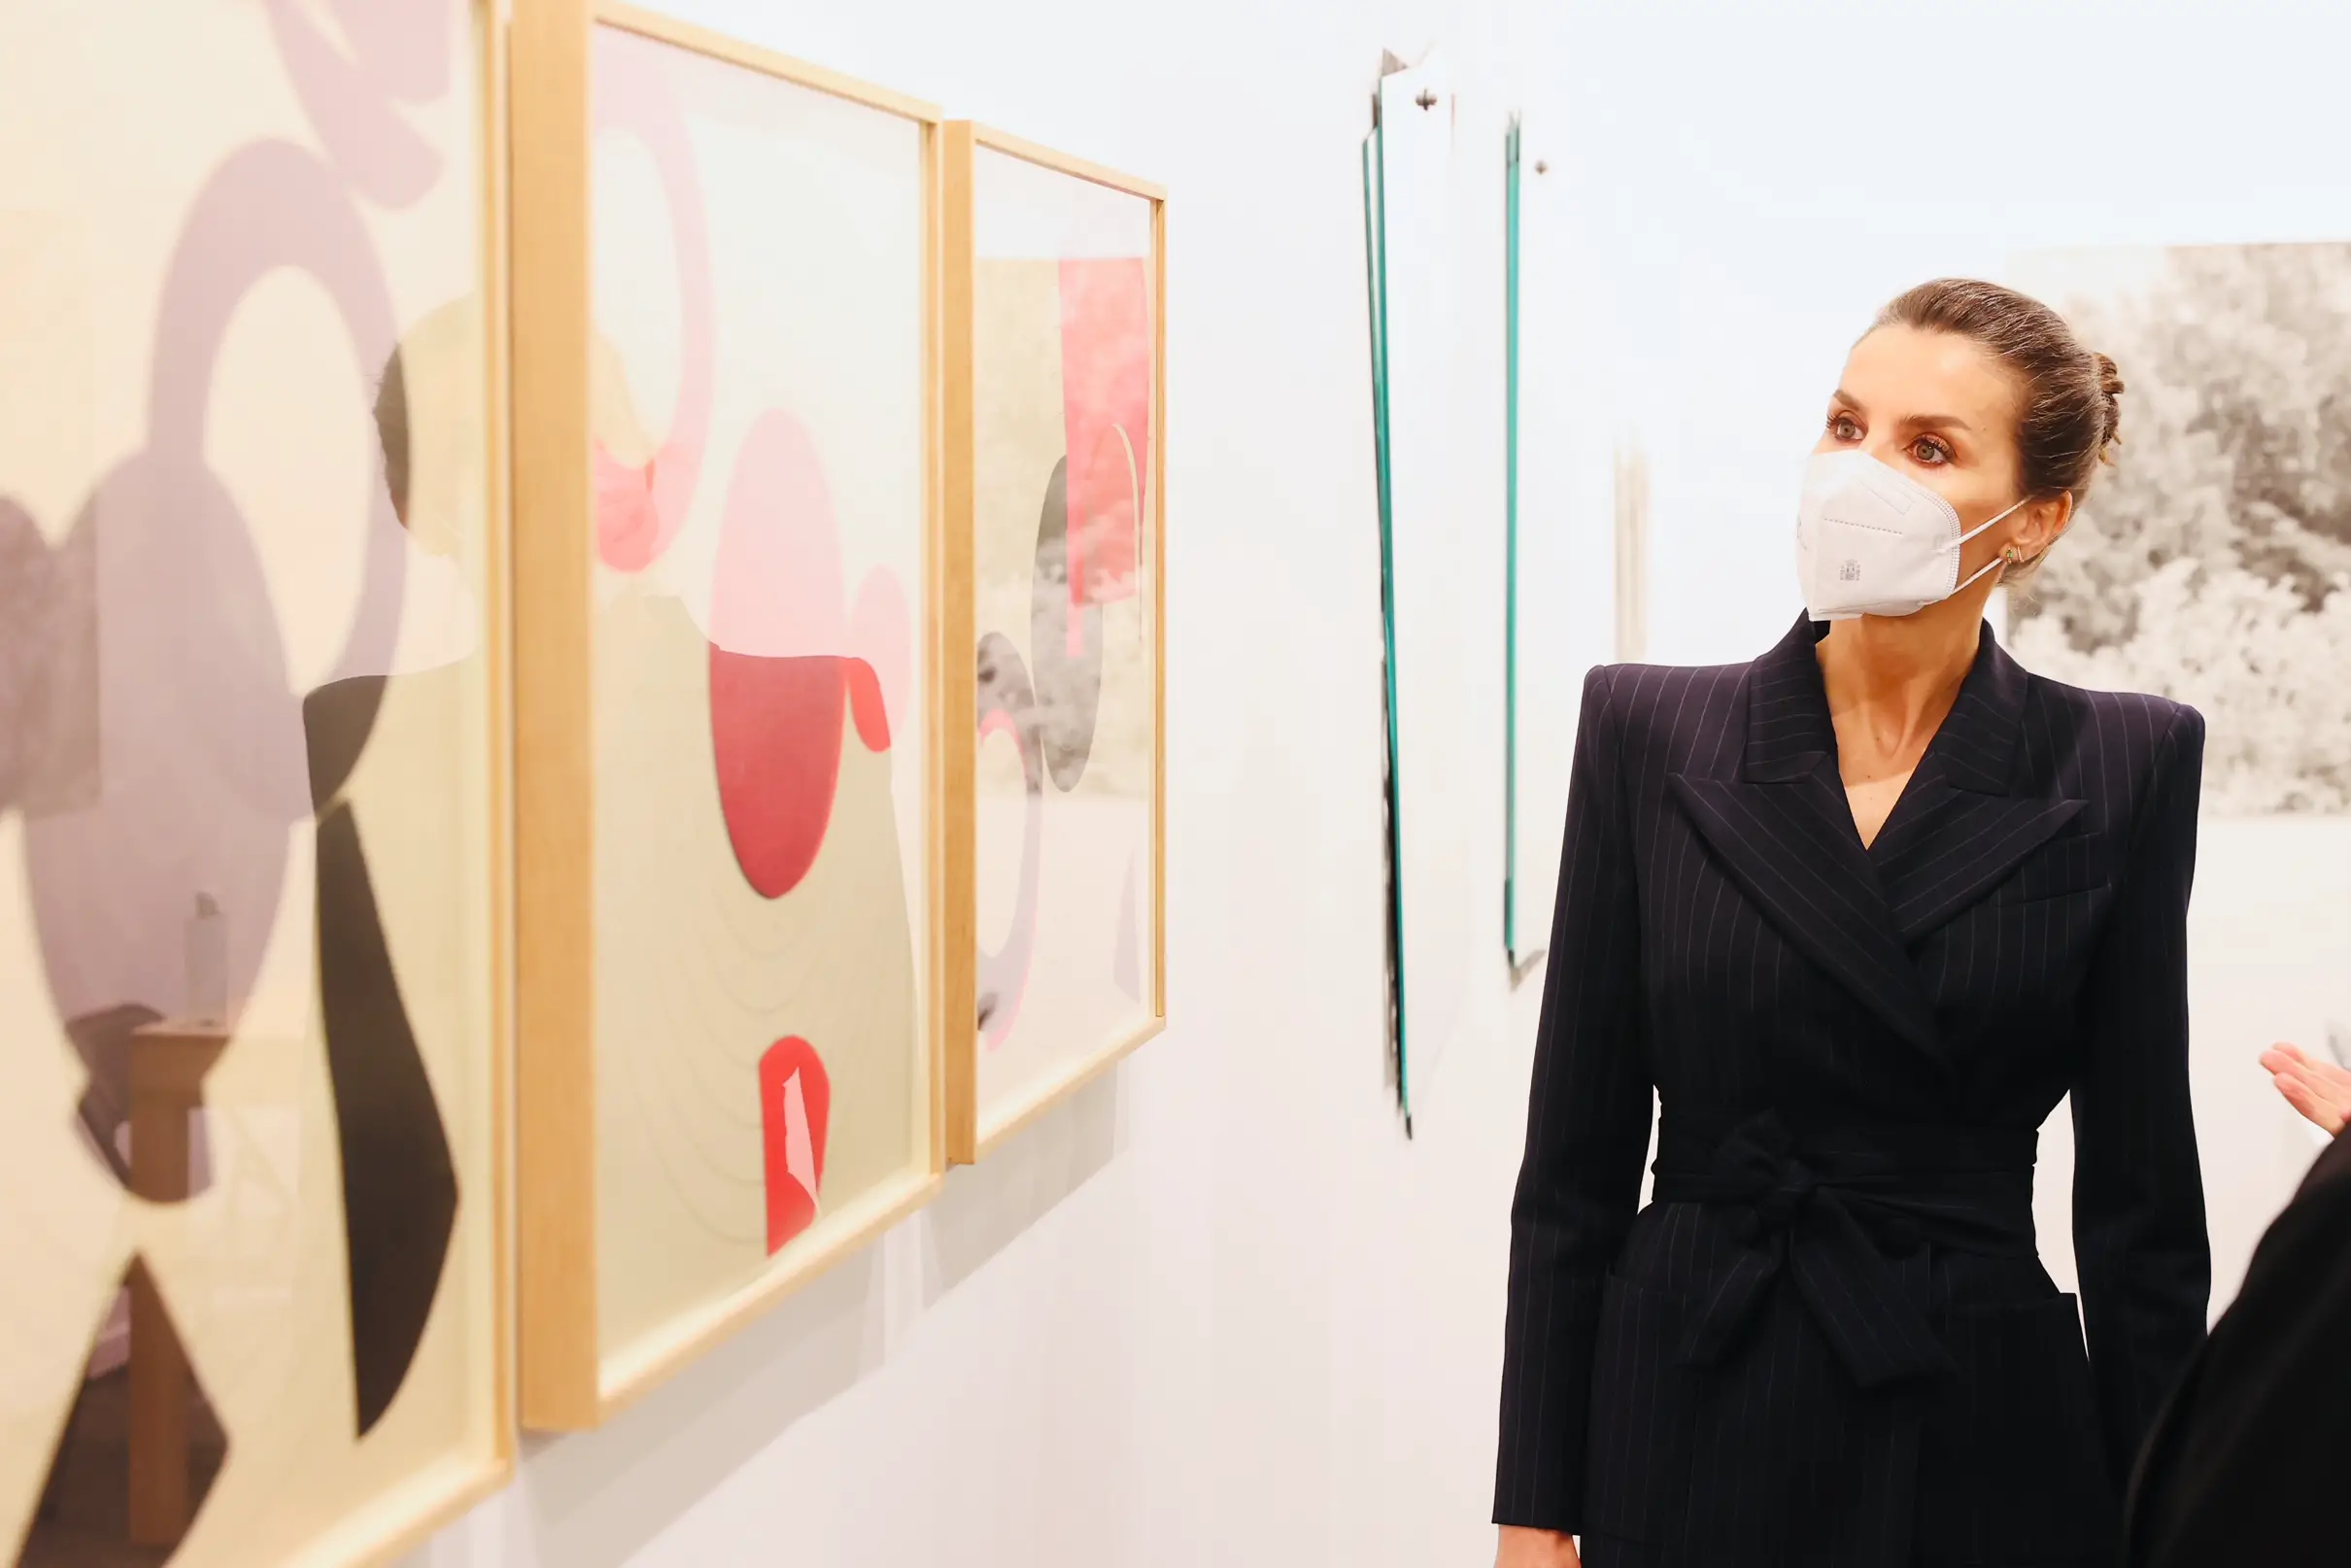 Queen Letizia of Spain inaugurated the 41st edition of the International Contemporary Art Fair-ARCOmadrid at Ifema-Madrid